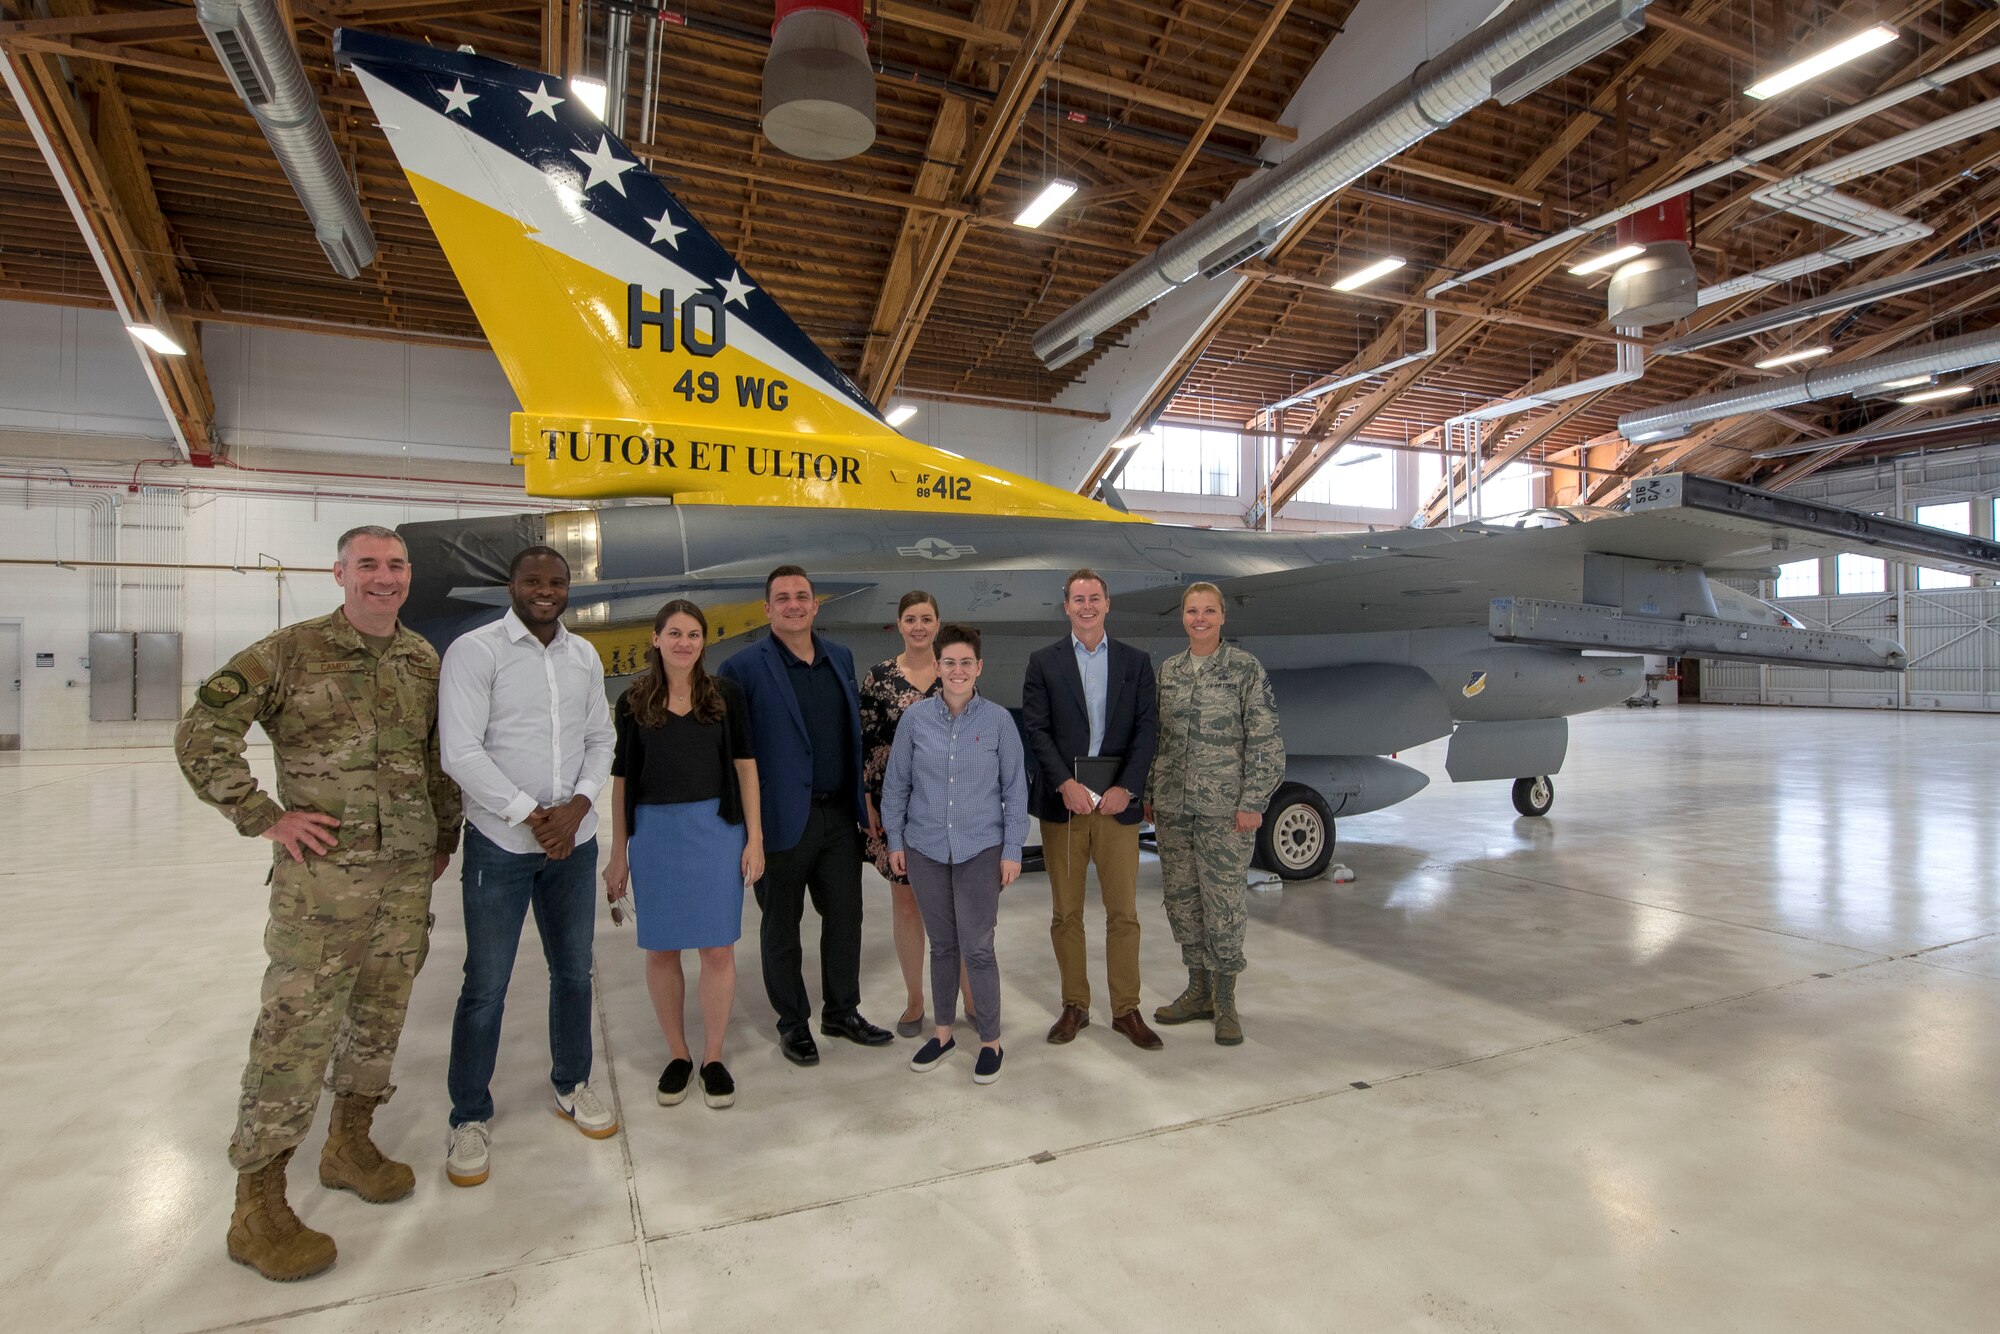 Col. Joseph Campo, 49th Wing commander and Chief Master Sgt. Sarah Esparza, 49th Wing command chief, pose with congressional staffers, Oct. 2, 2019, on Holloman Air Force Base, N.M. Staffers visited to understand the mission of the 49th Wing, which graduates combat ready aircrews and enabling support to various mission partners and tenant units. (U.S. Air Force photo by Staff Sgt. Christine Groening)